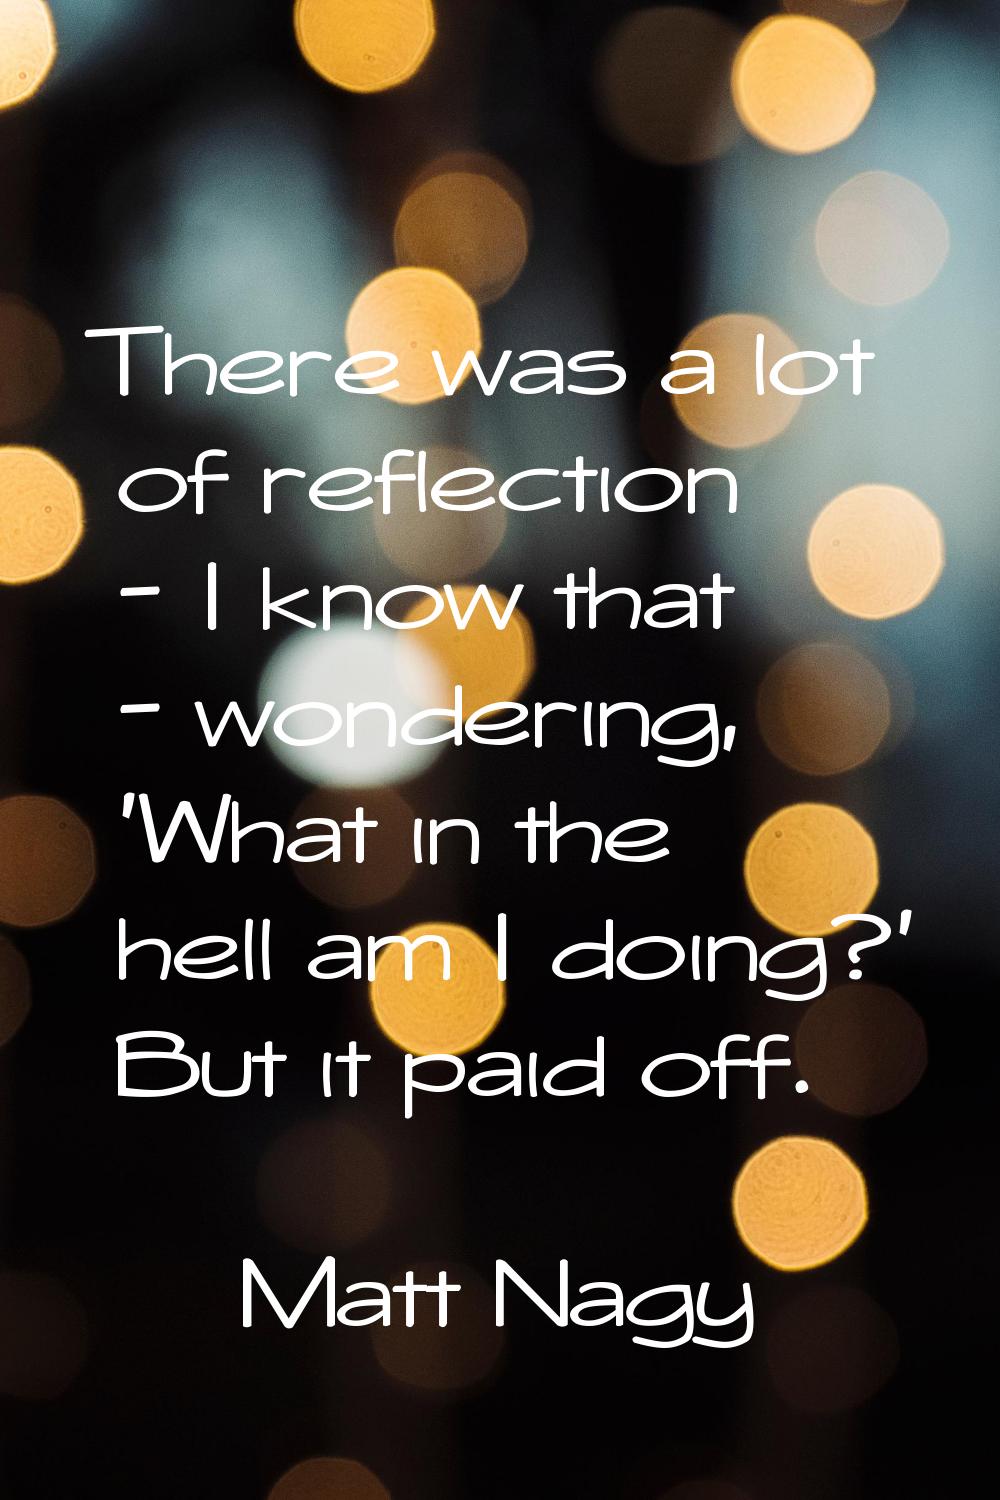 There was a lot of reflection - I know that - wondering, 'What in the hell am I doing?' But it paid